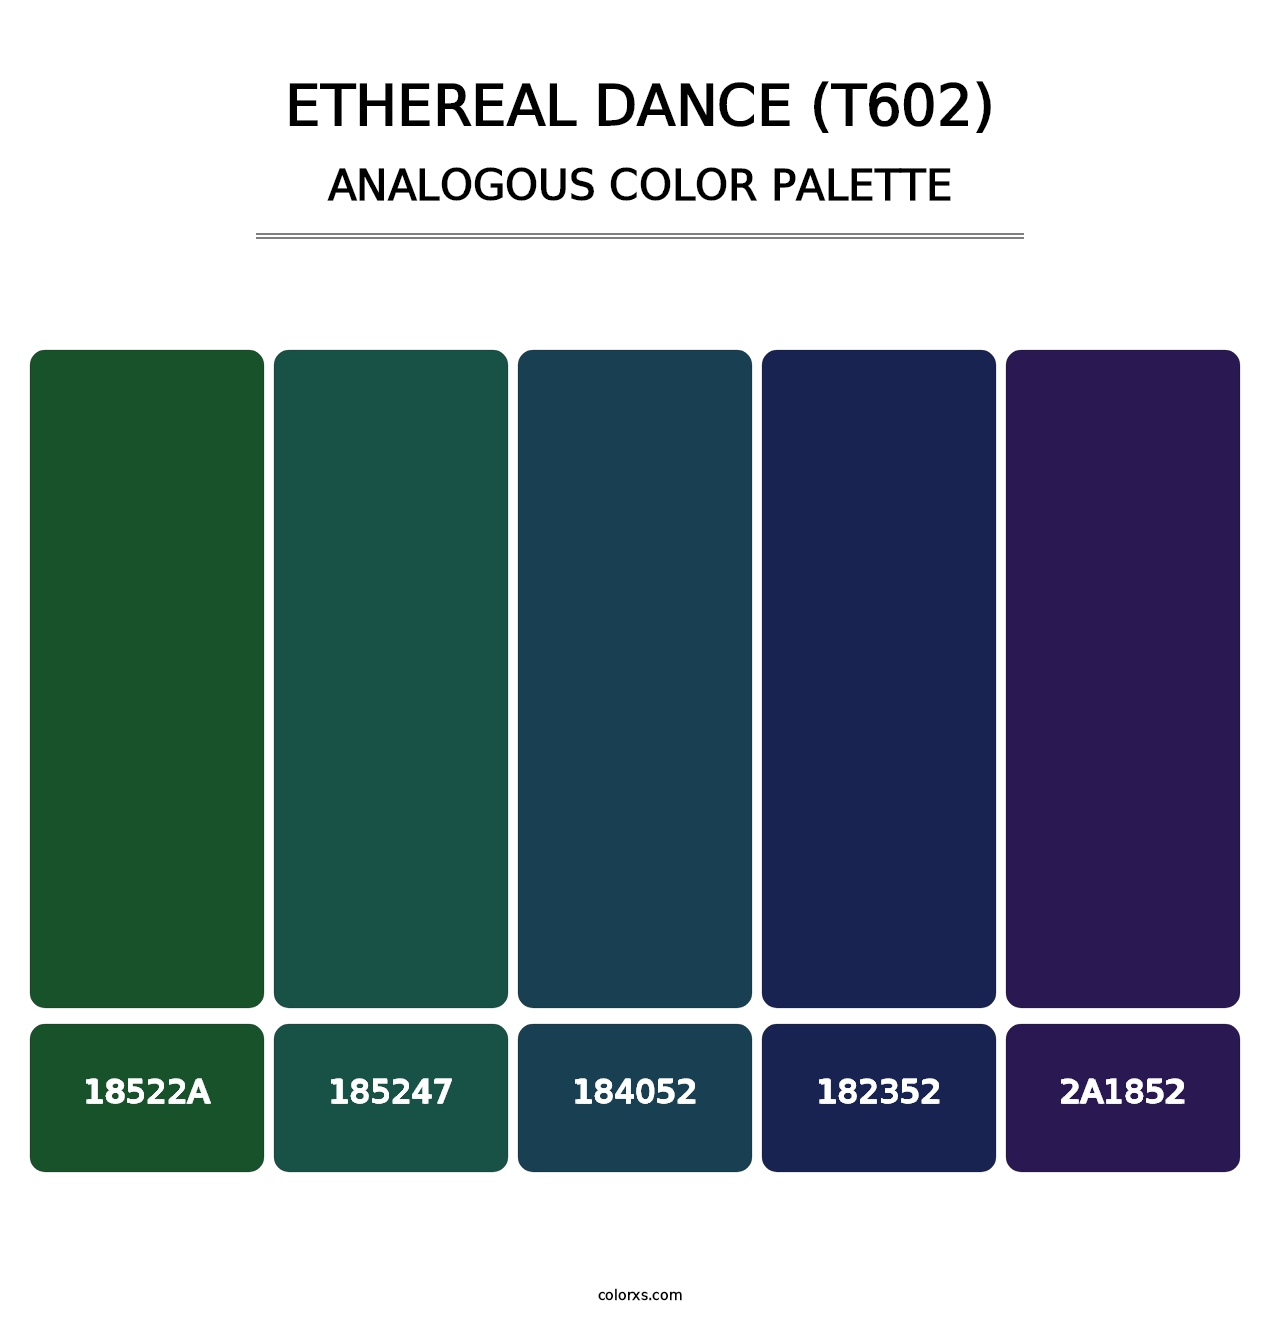 Ethereal Dance (T602) - Analogous Color Palette